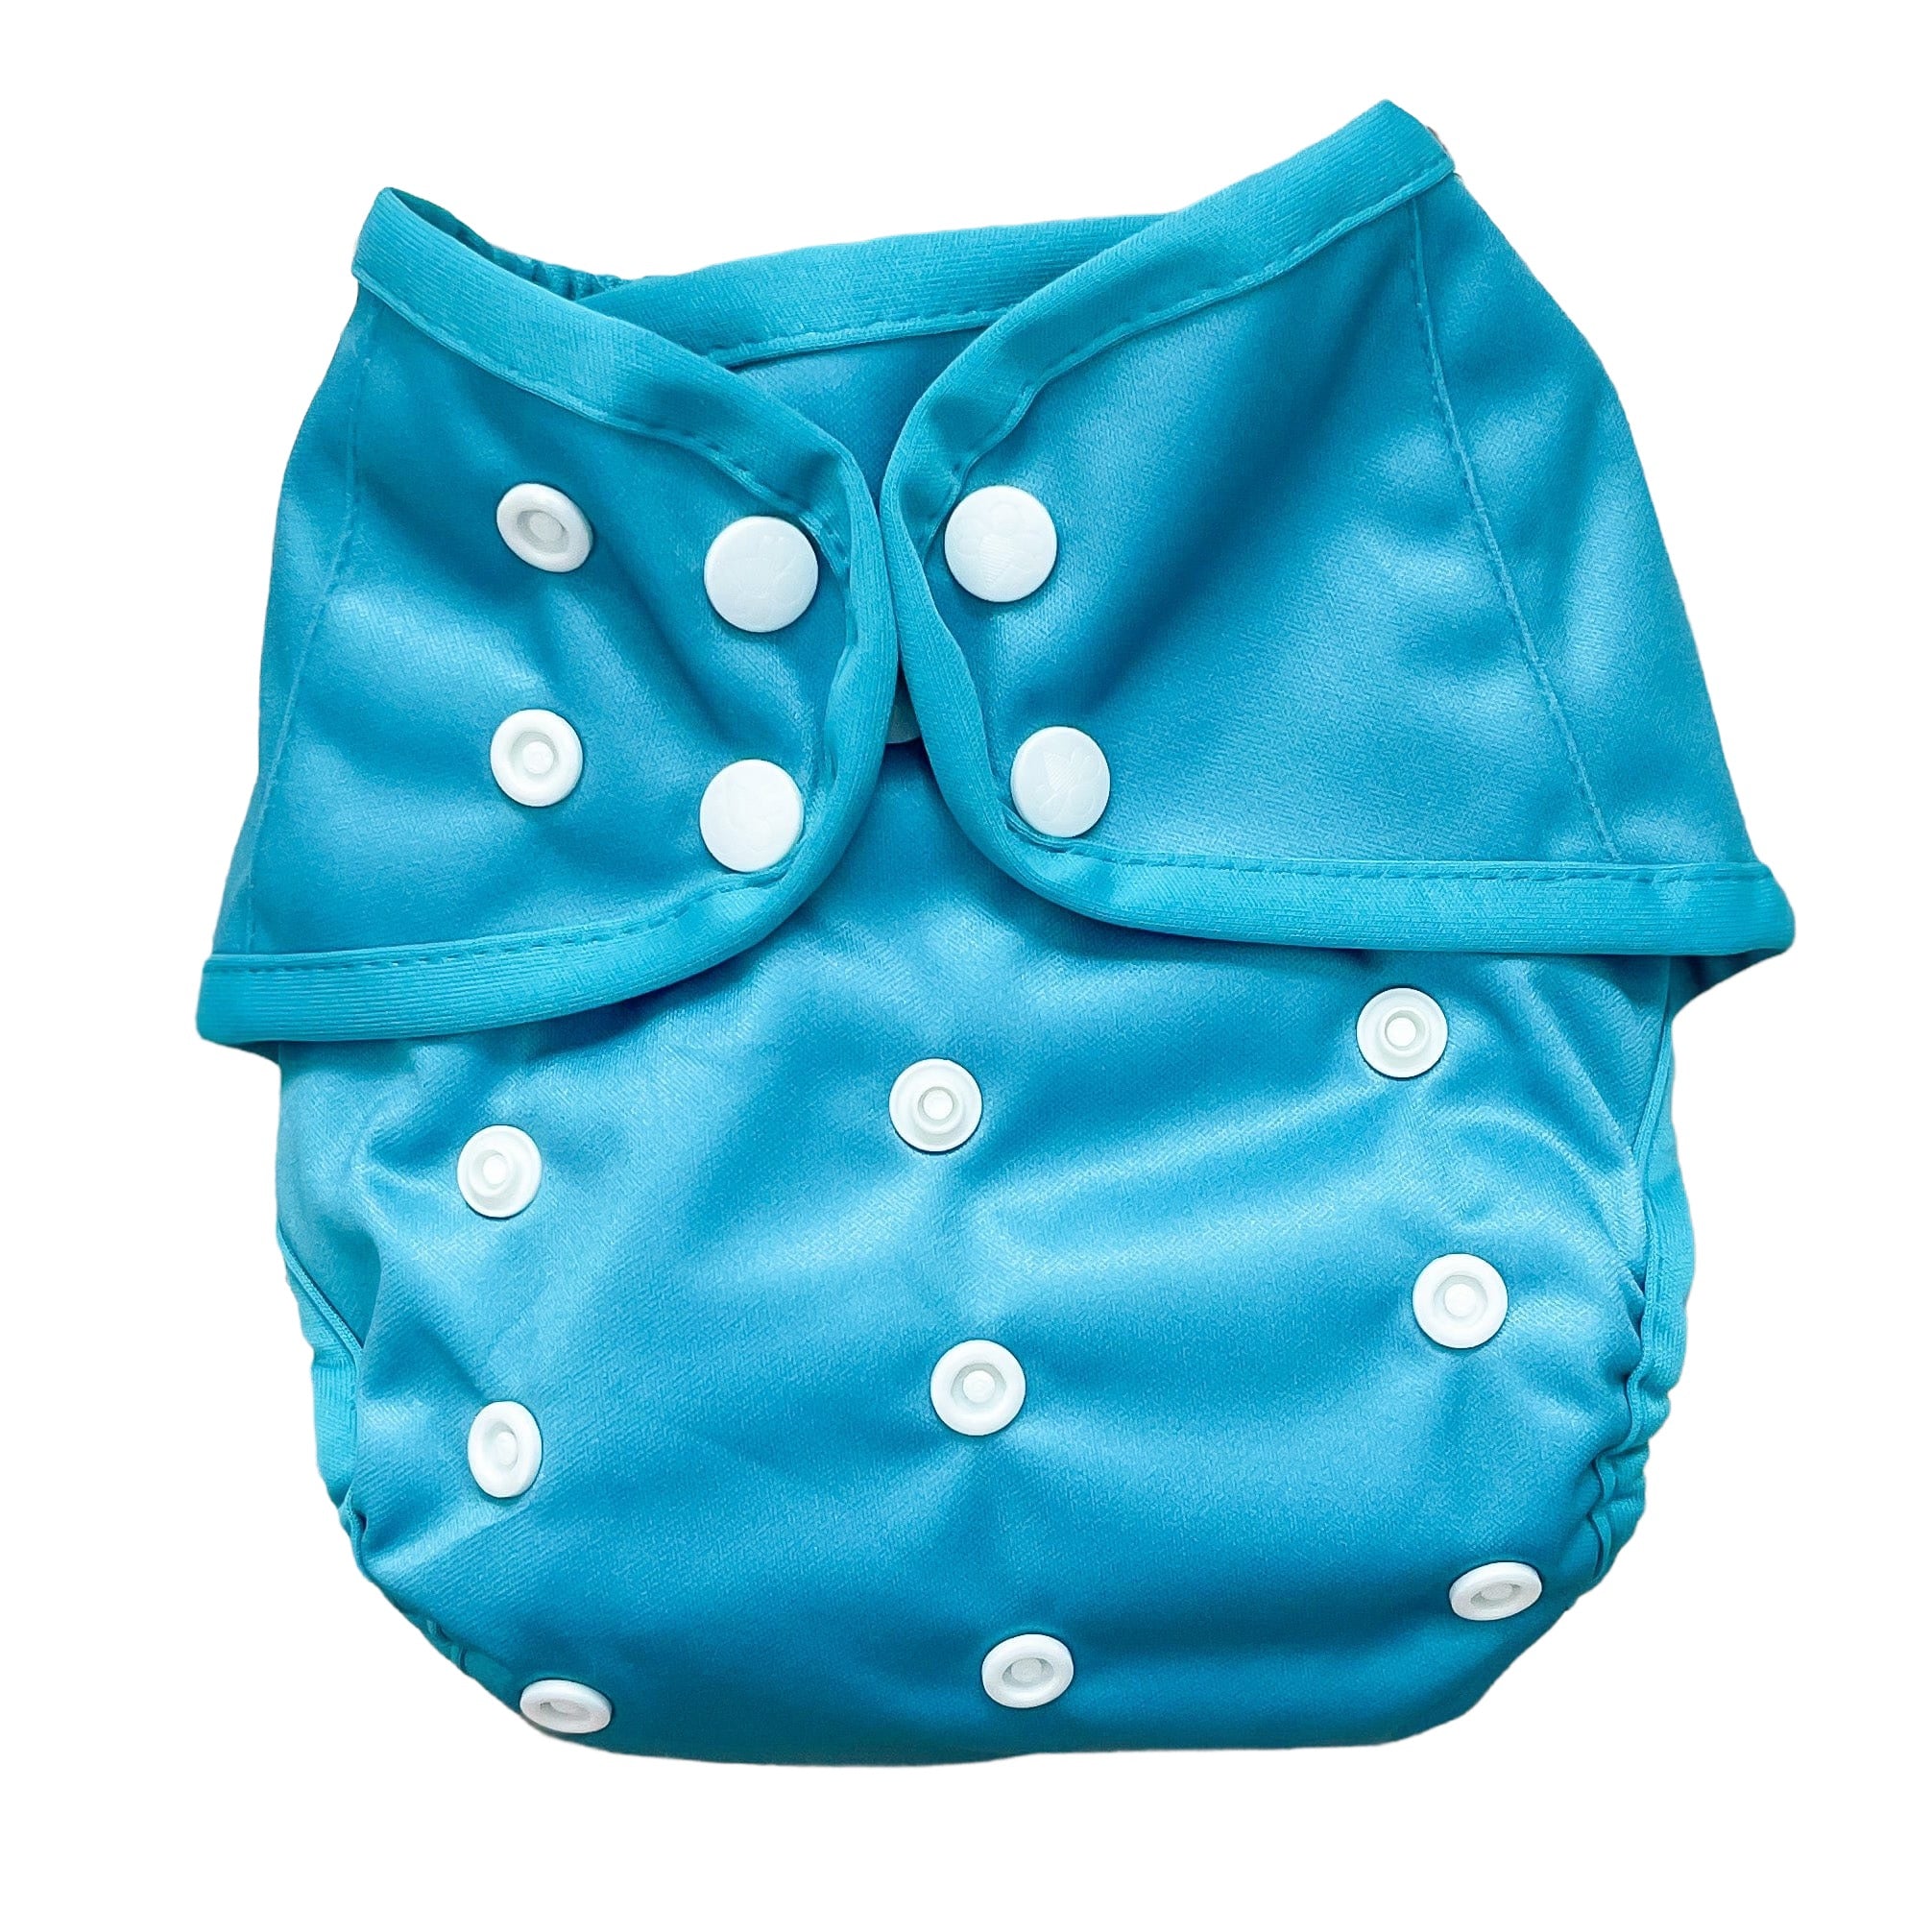 The "bally" One Size Diaper Cover By Happy Beehinds - Colors